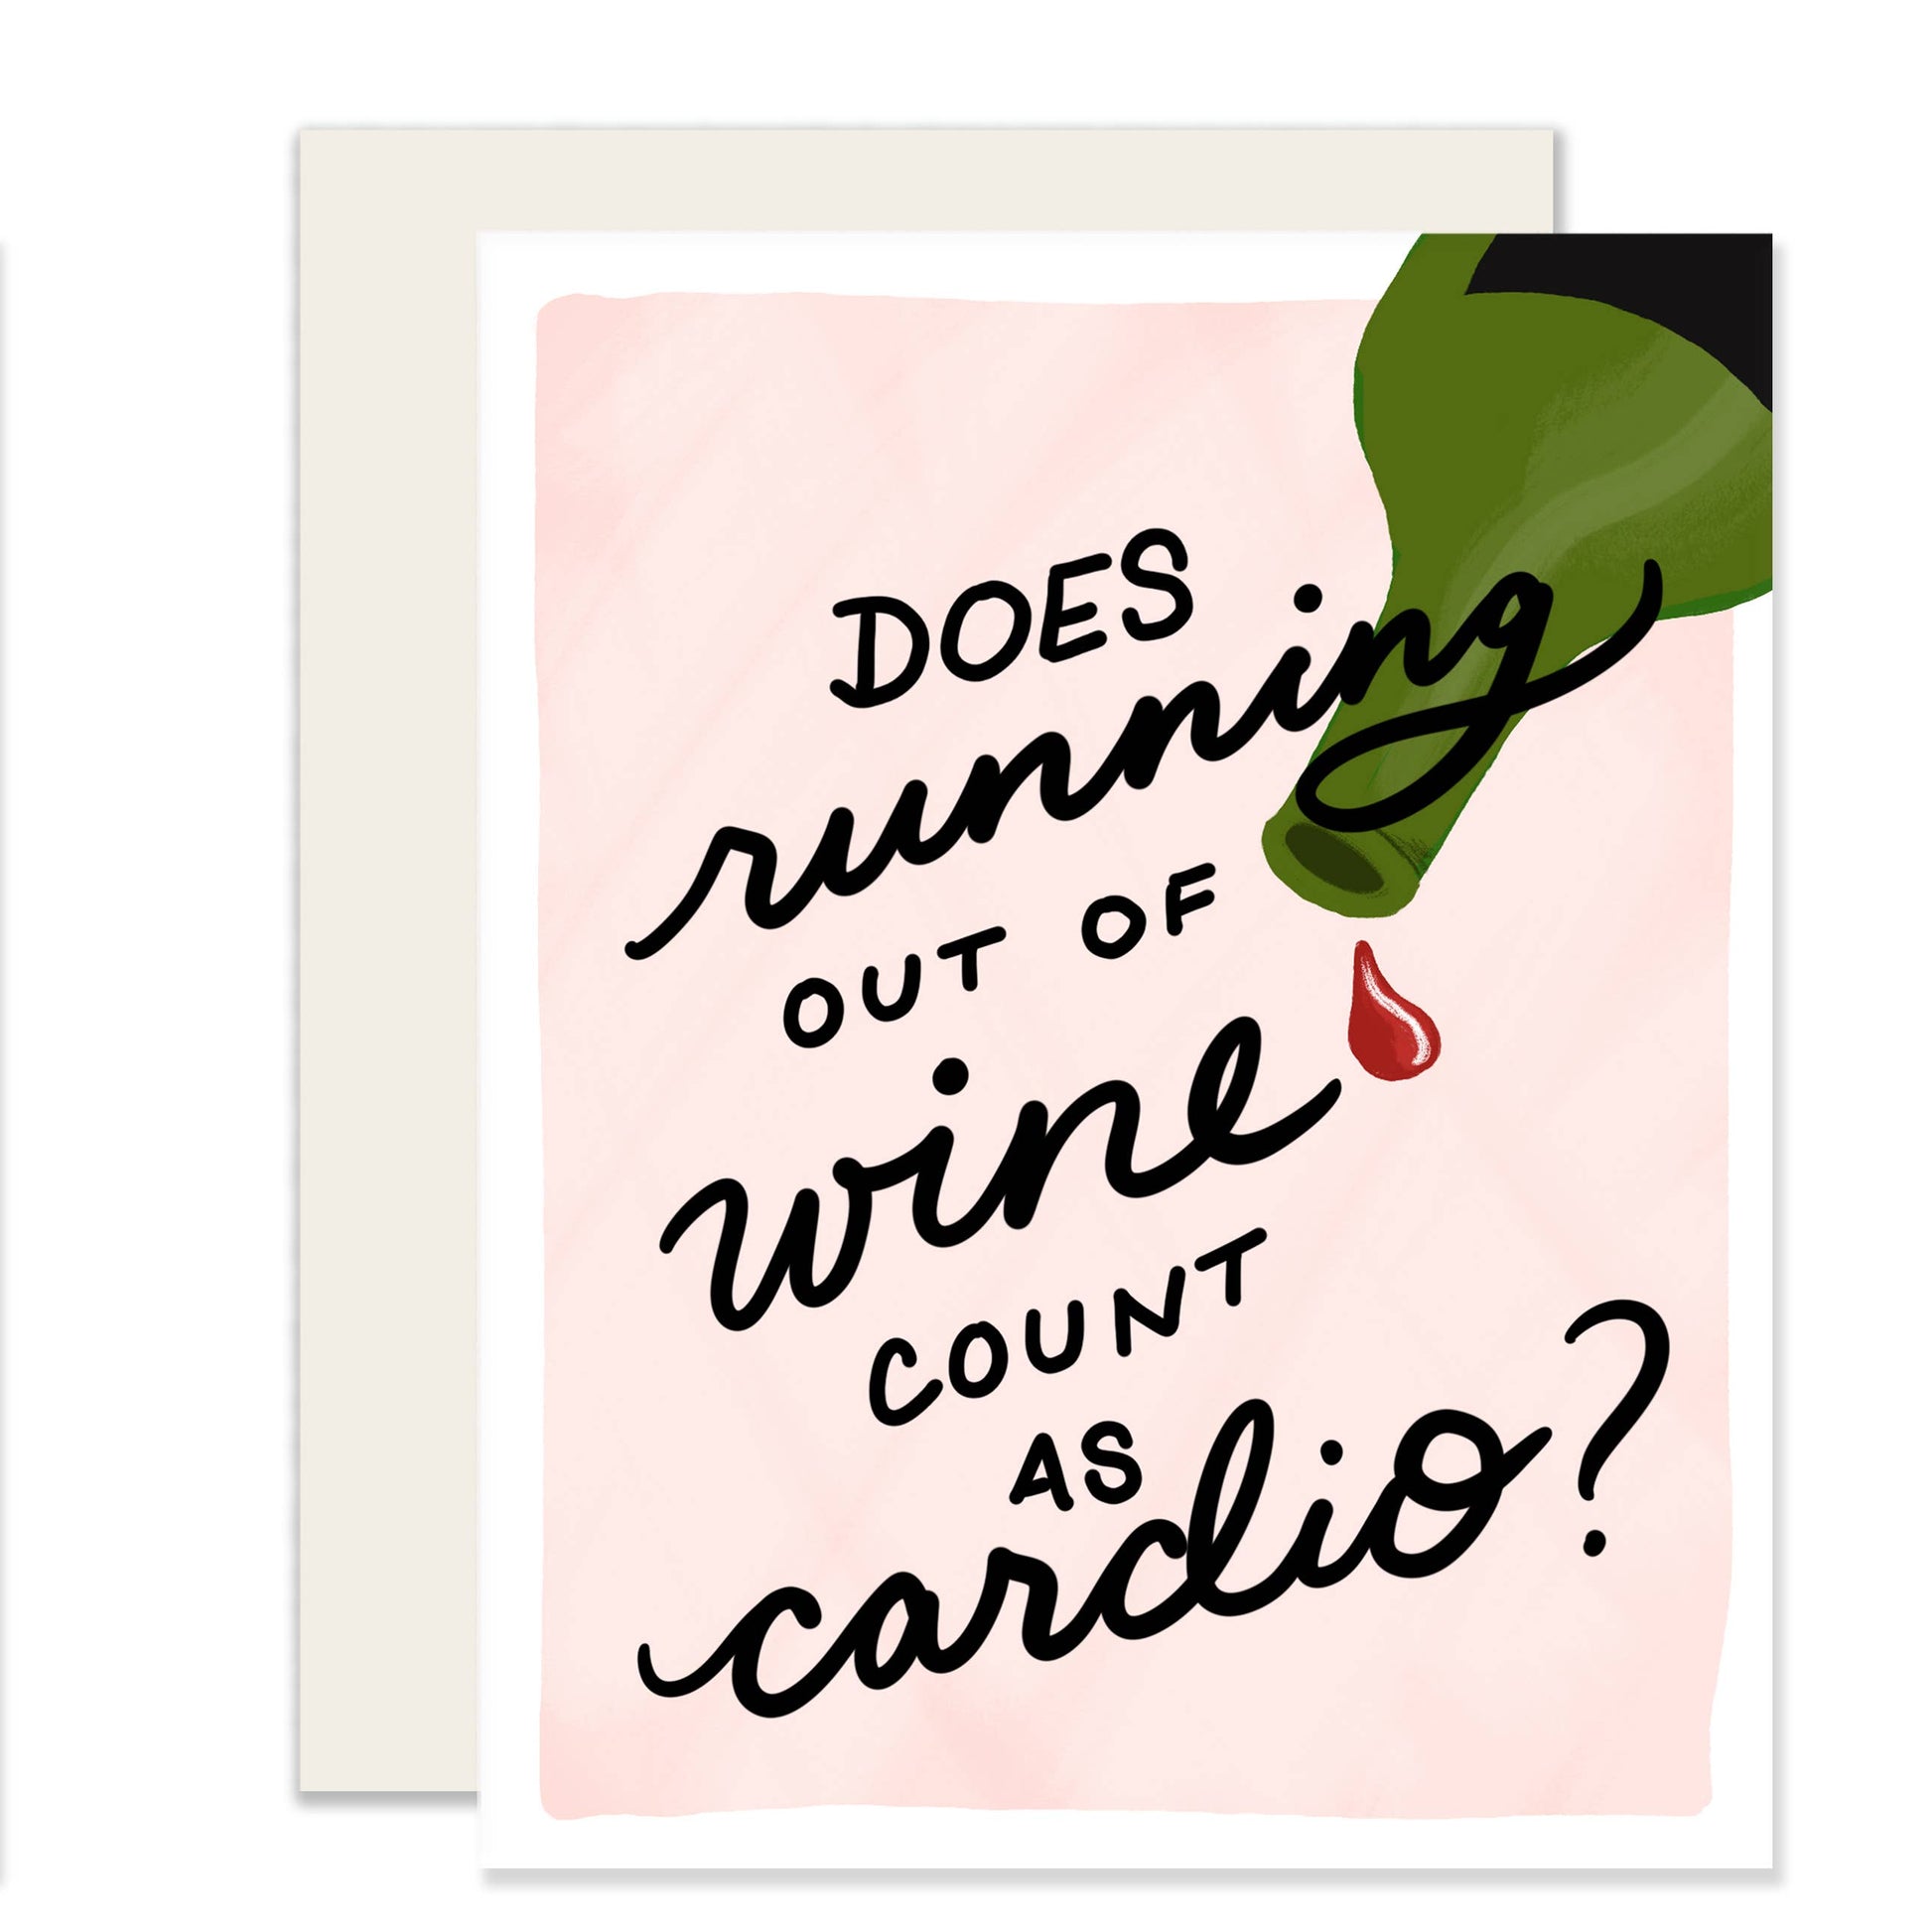 Wine cardio greeting card that reads "Does running out of wine count as cardio?"